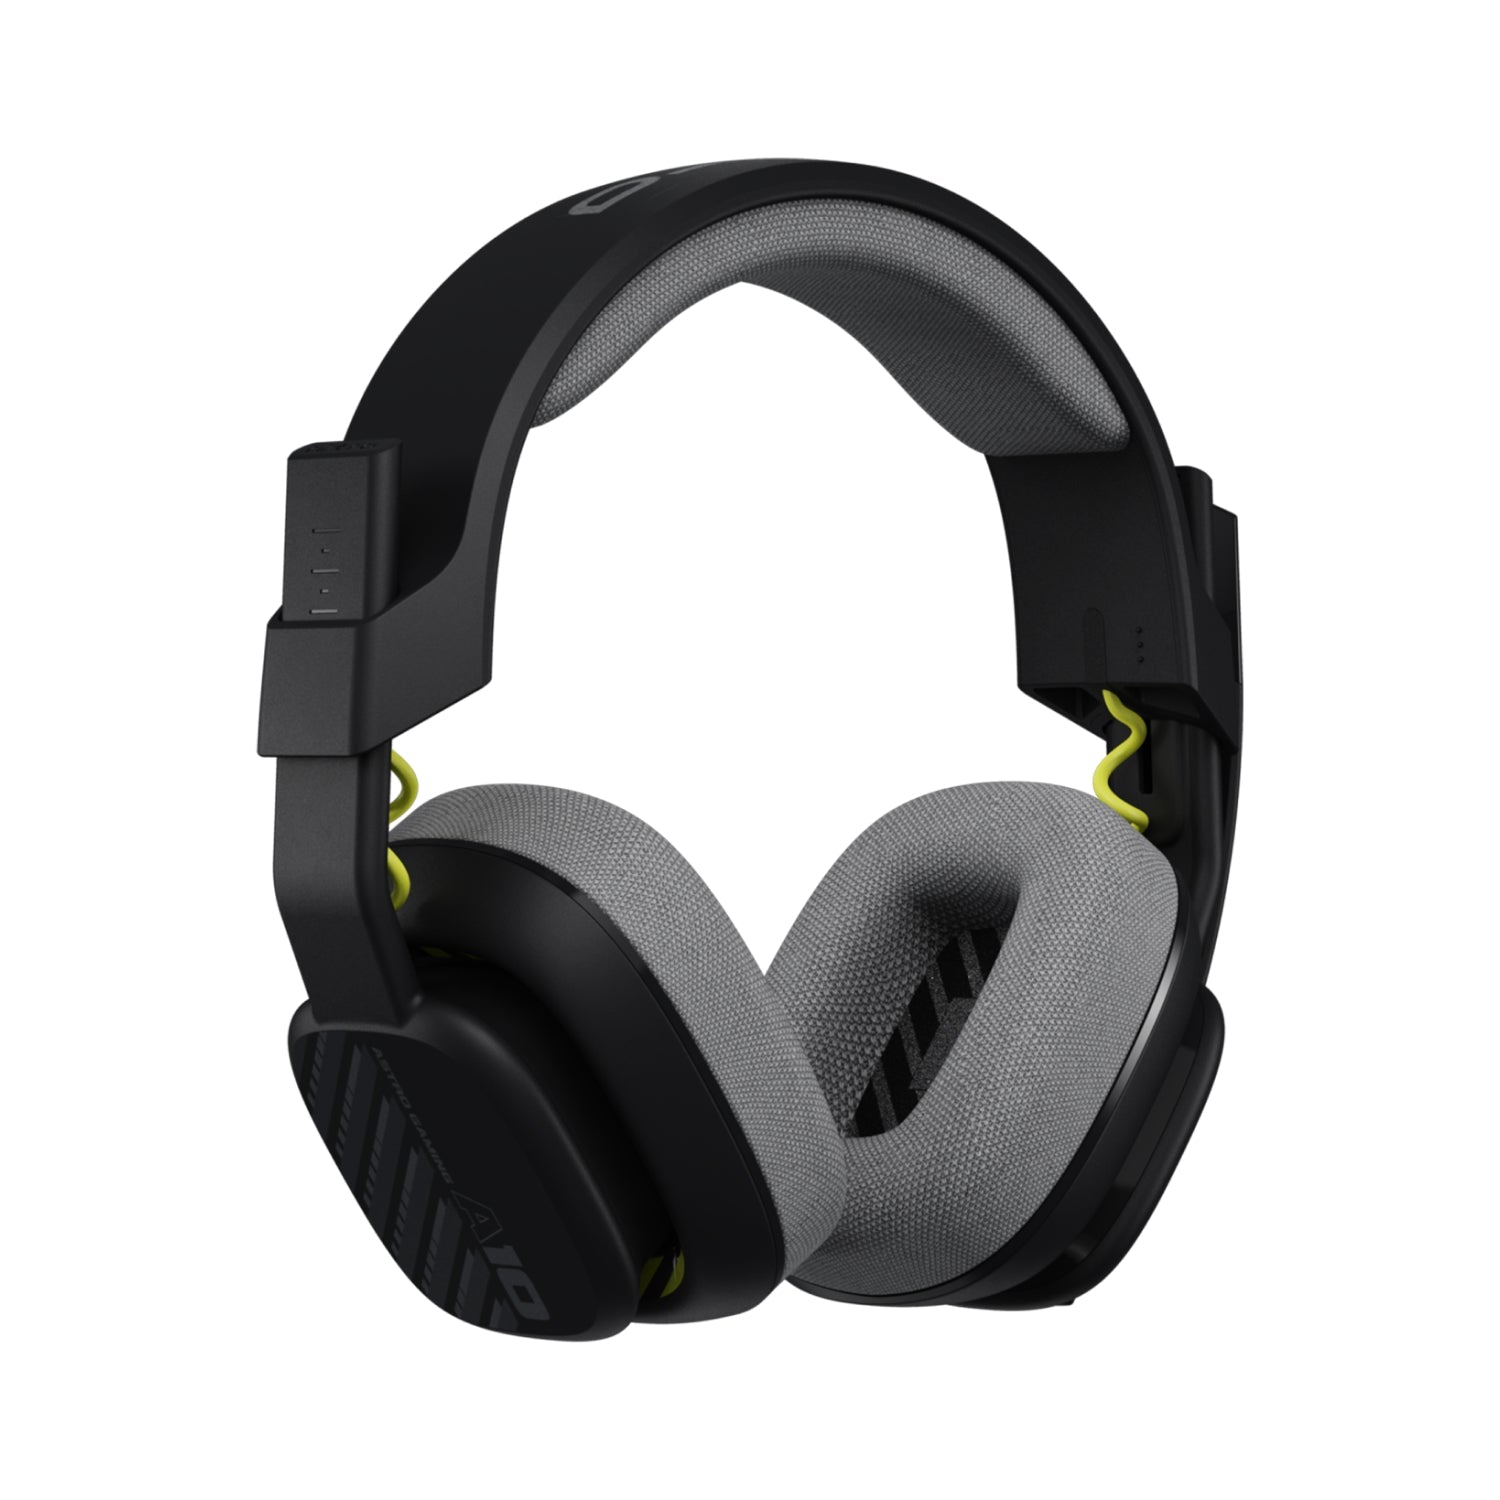 Astro A10 Gaming Headset Gen 2 - Playstation/PC - Black